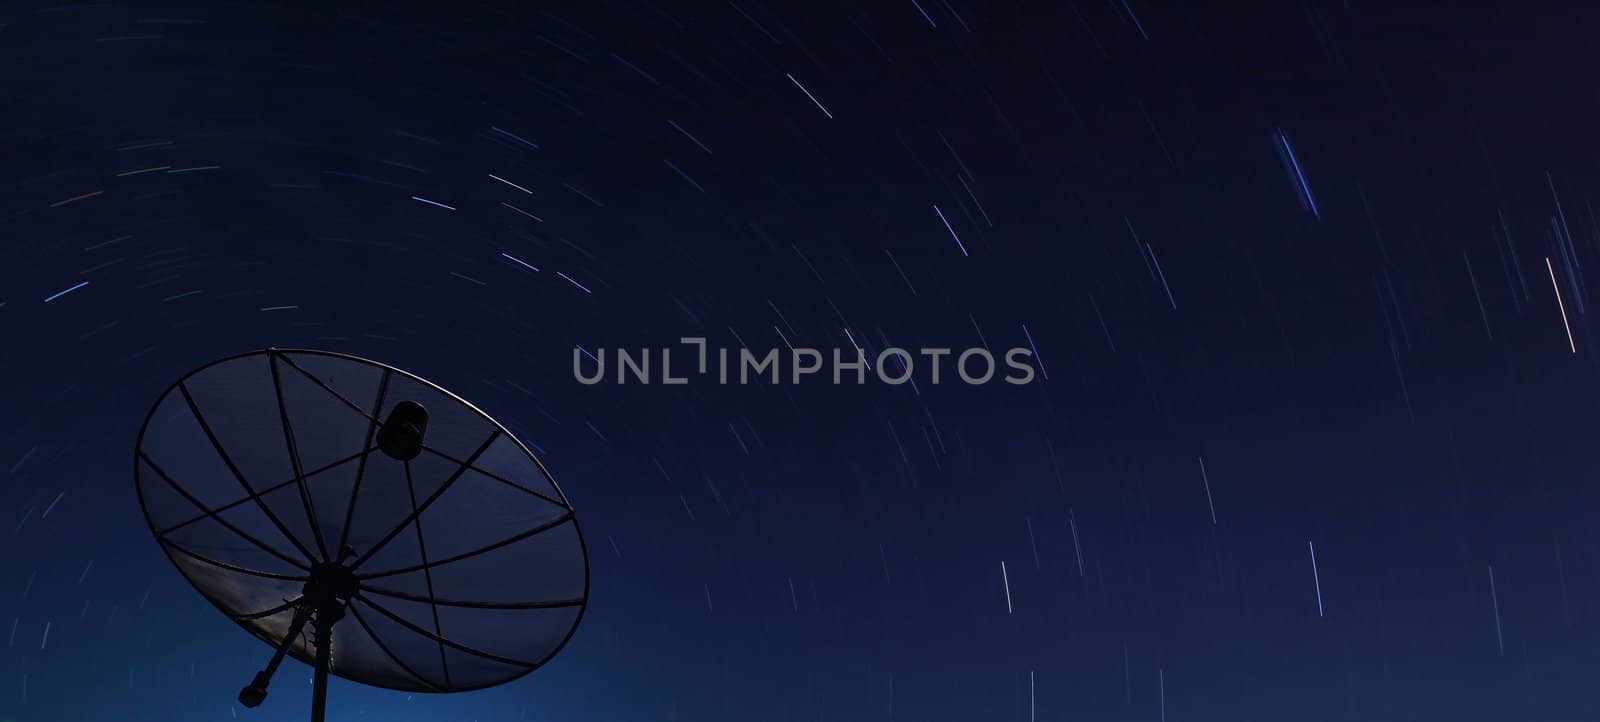 Conceptual of Big Black satellite over spiral star at night